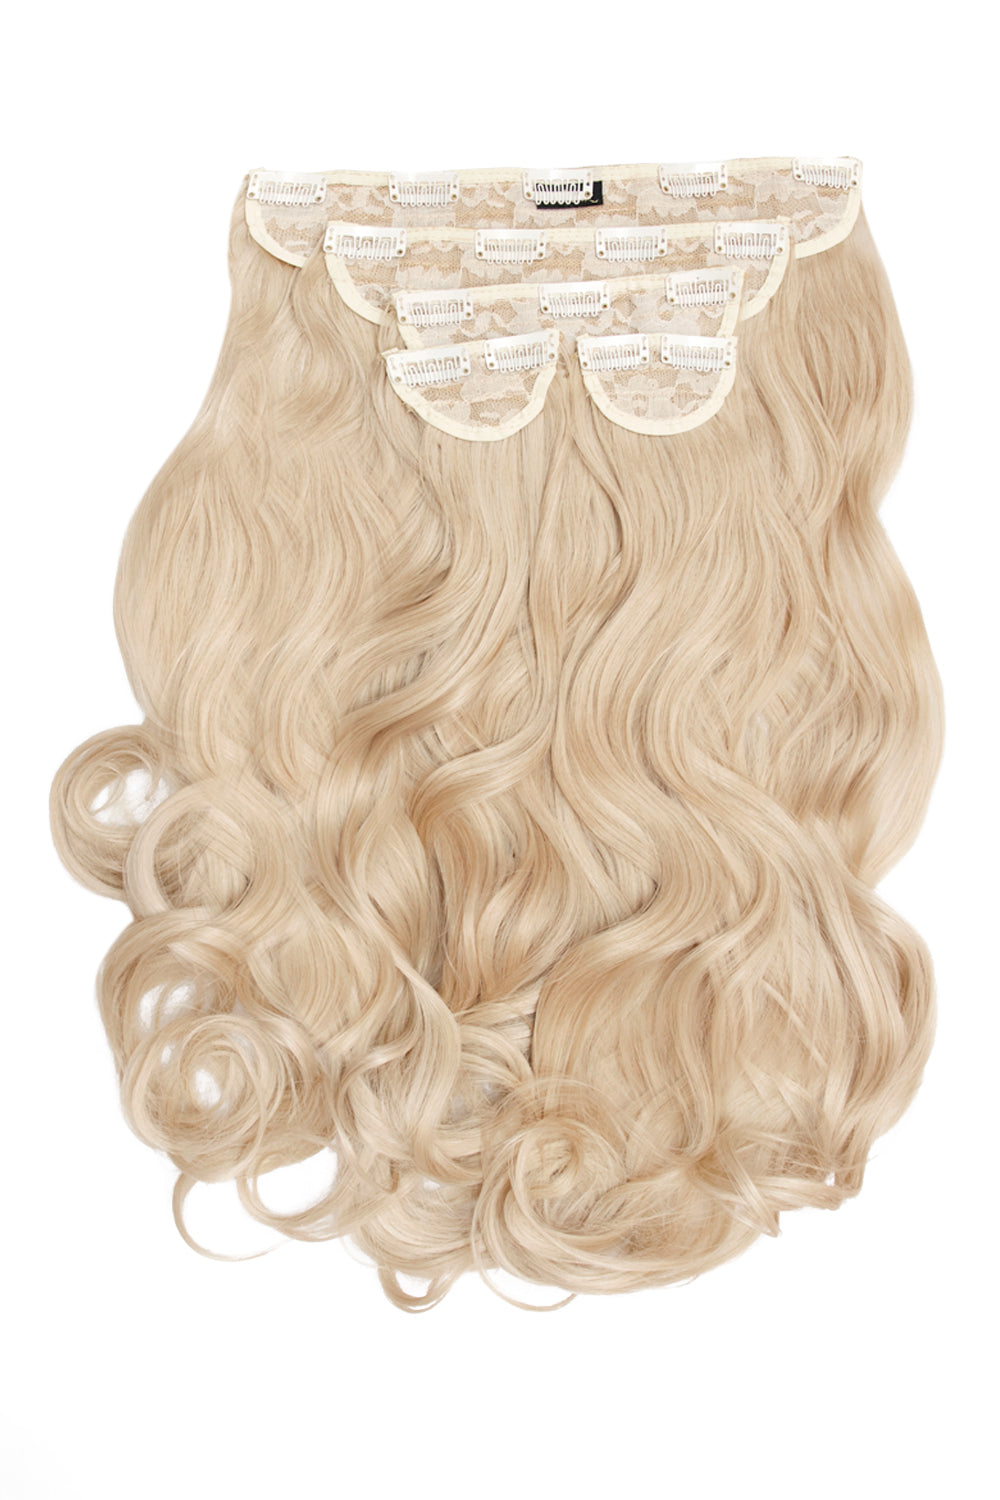 Super Thick 22" 5 Piece Curly Clip In Hair Extensions - Light Golden Blonde